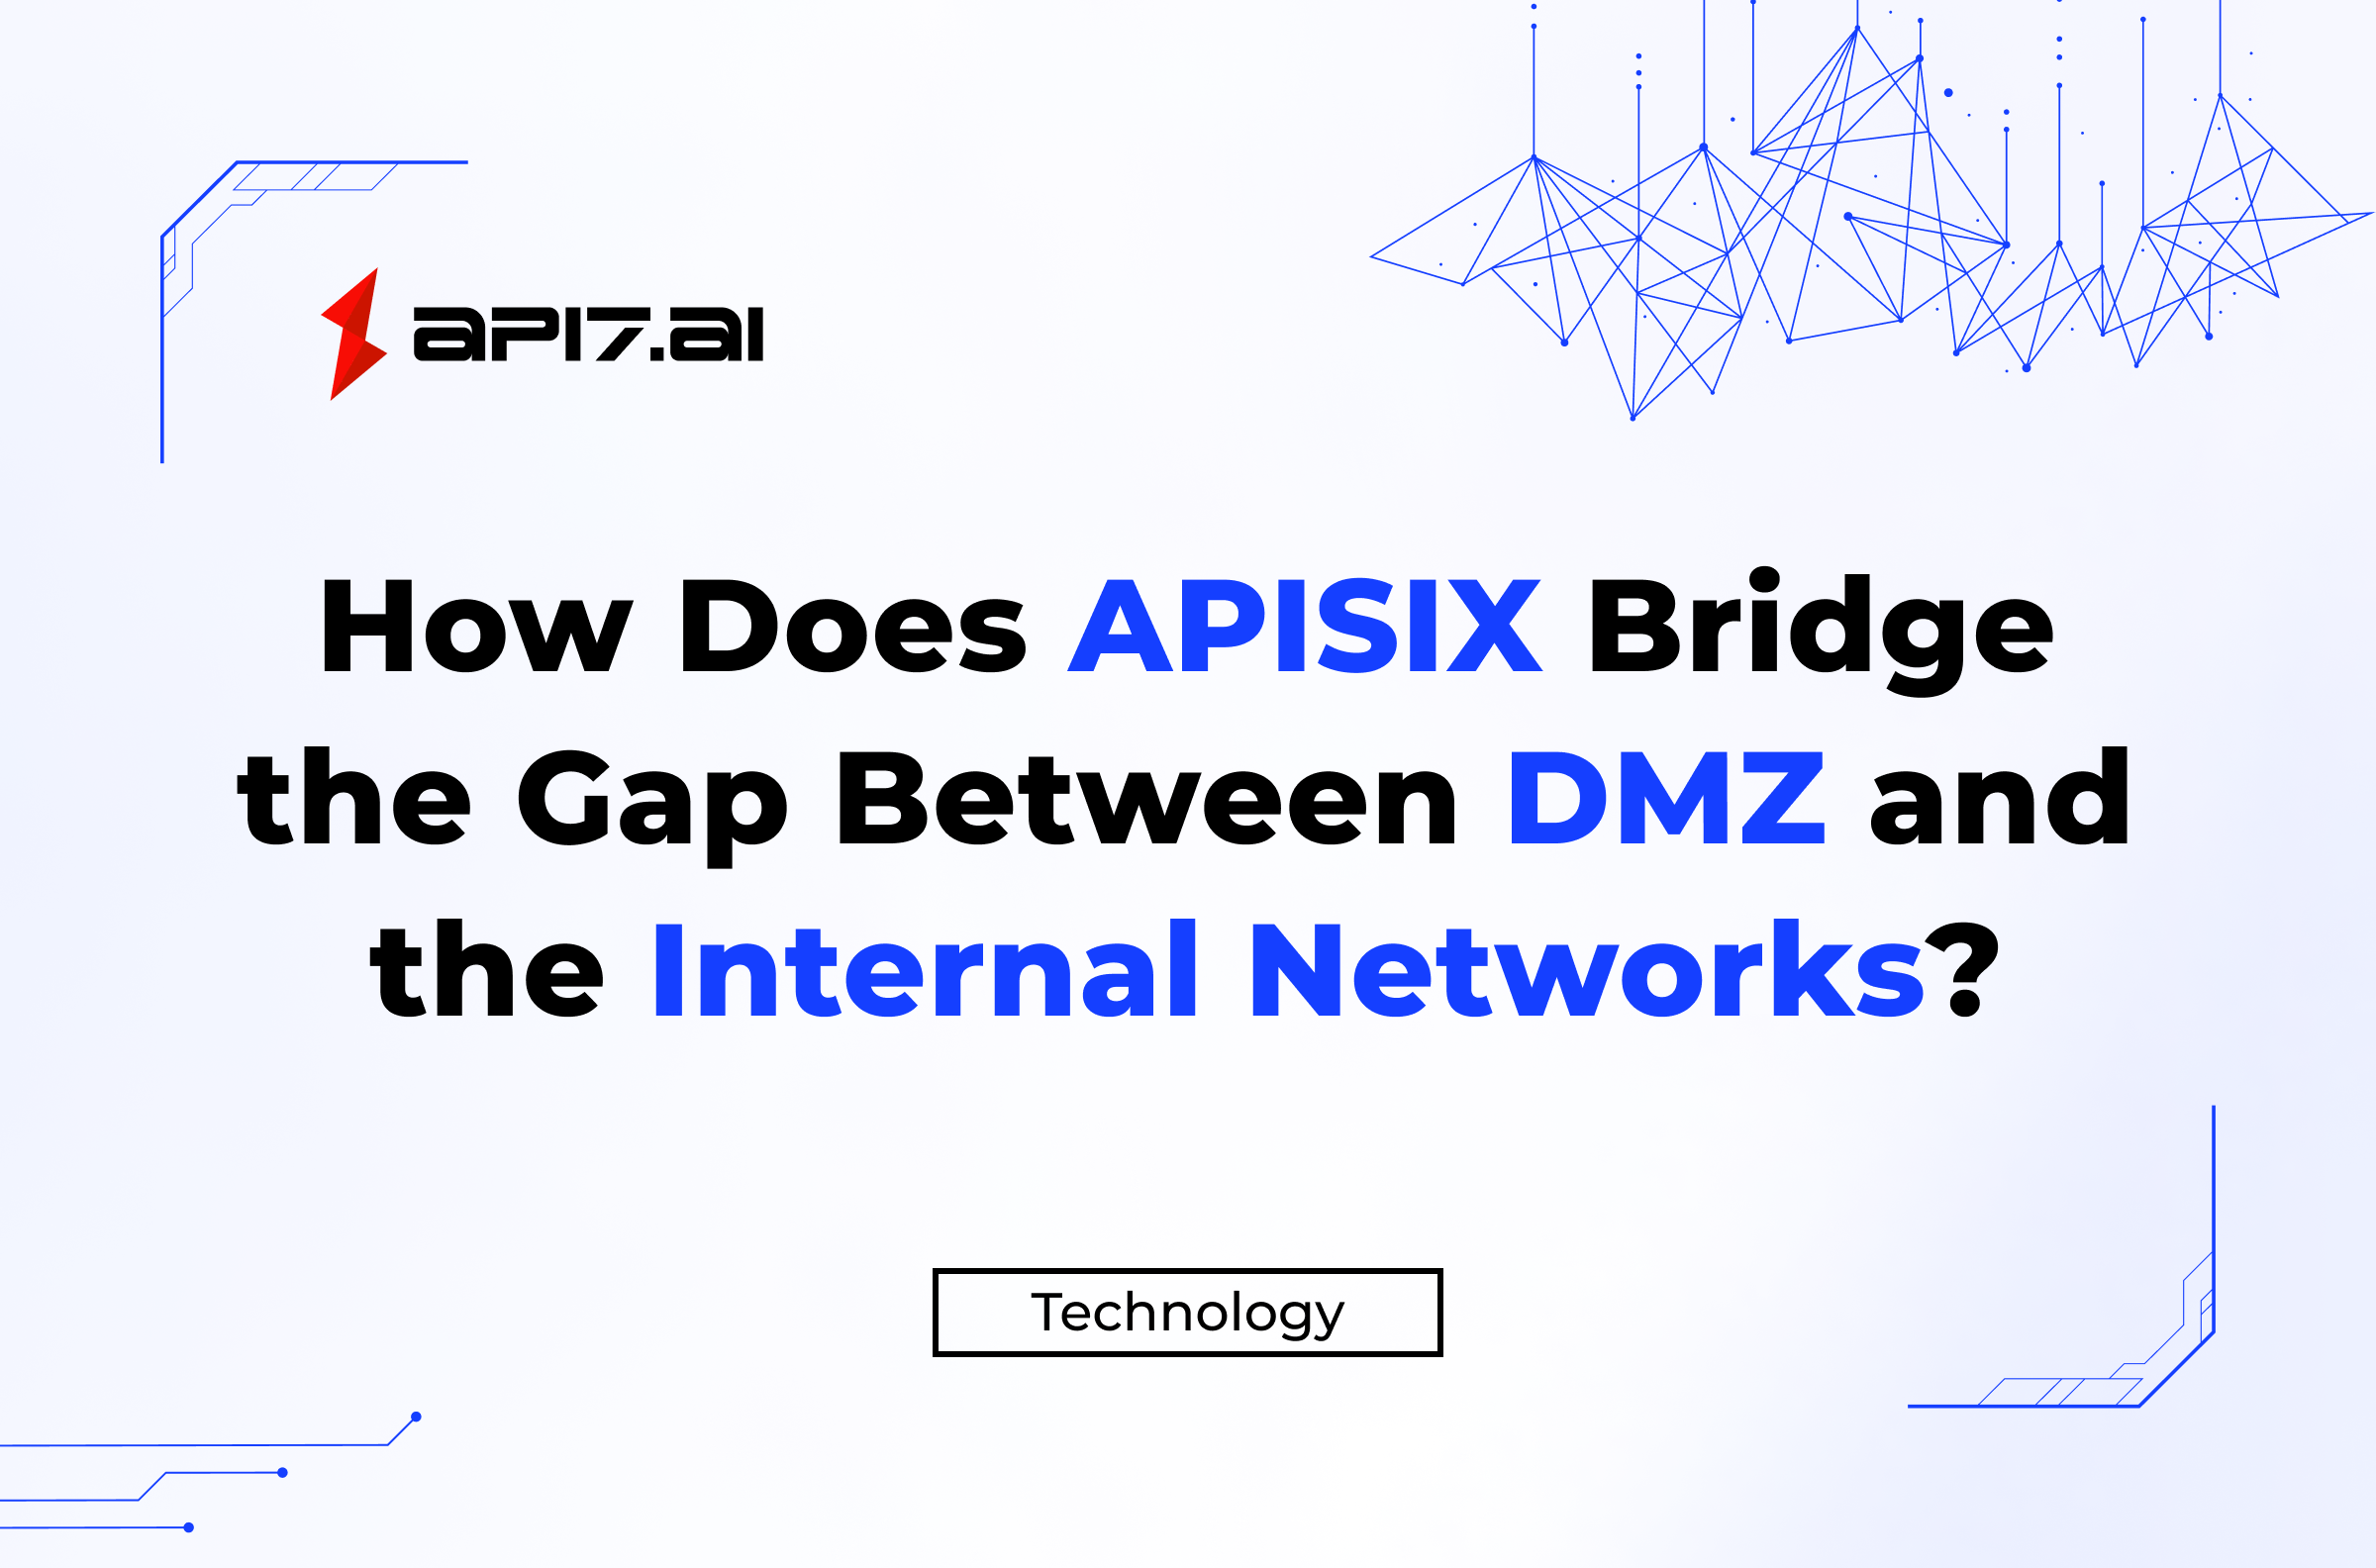 How Does APISIX Bridge the Gap Between DMZ and the Internal Networks?